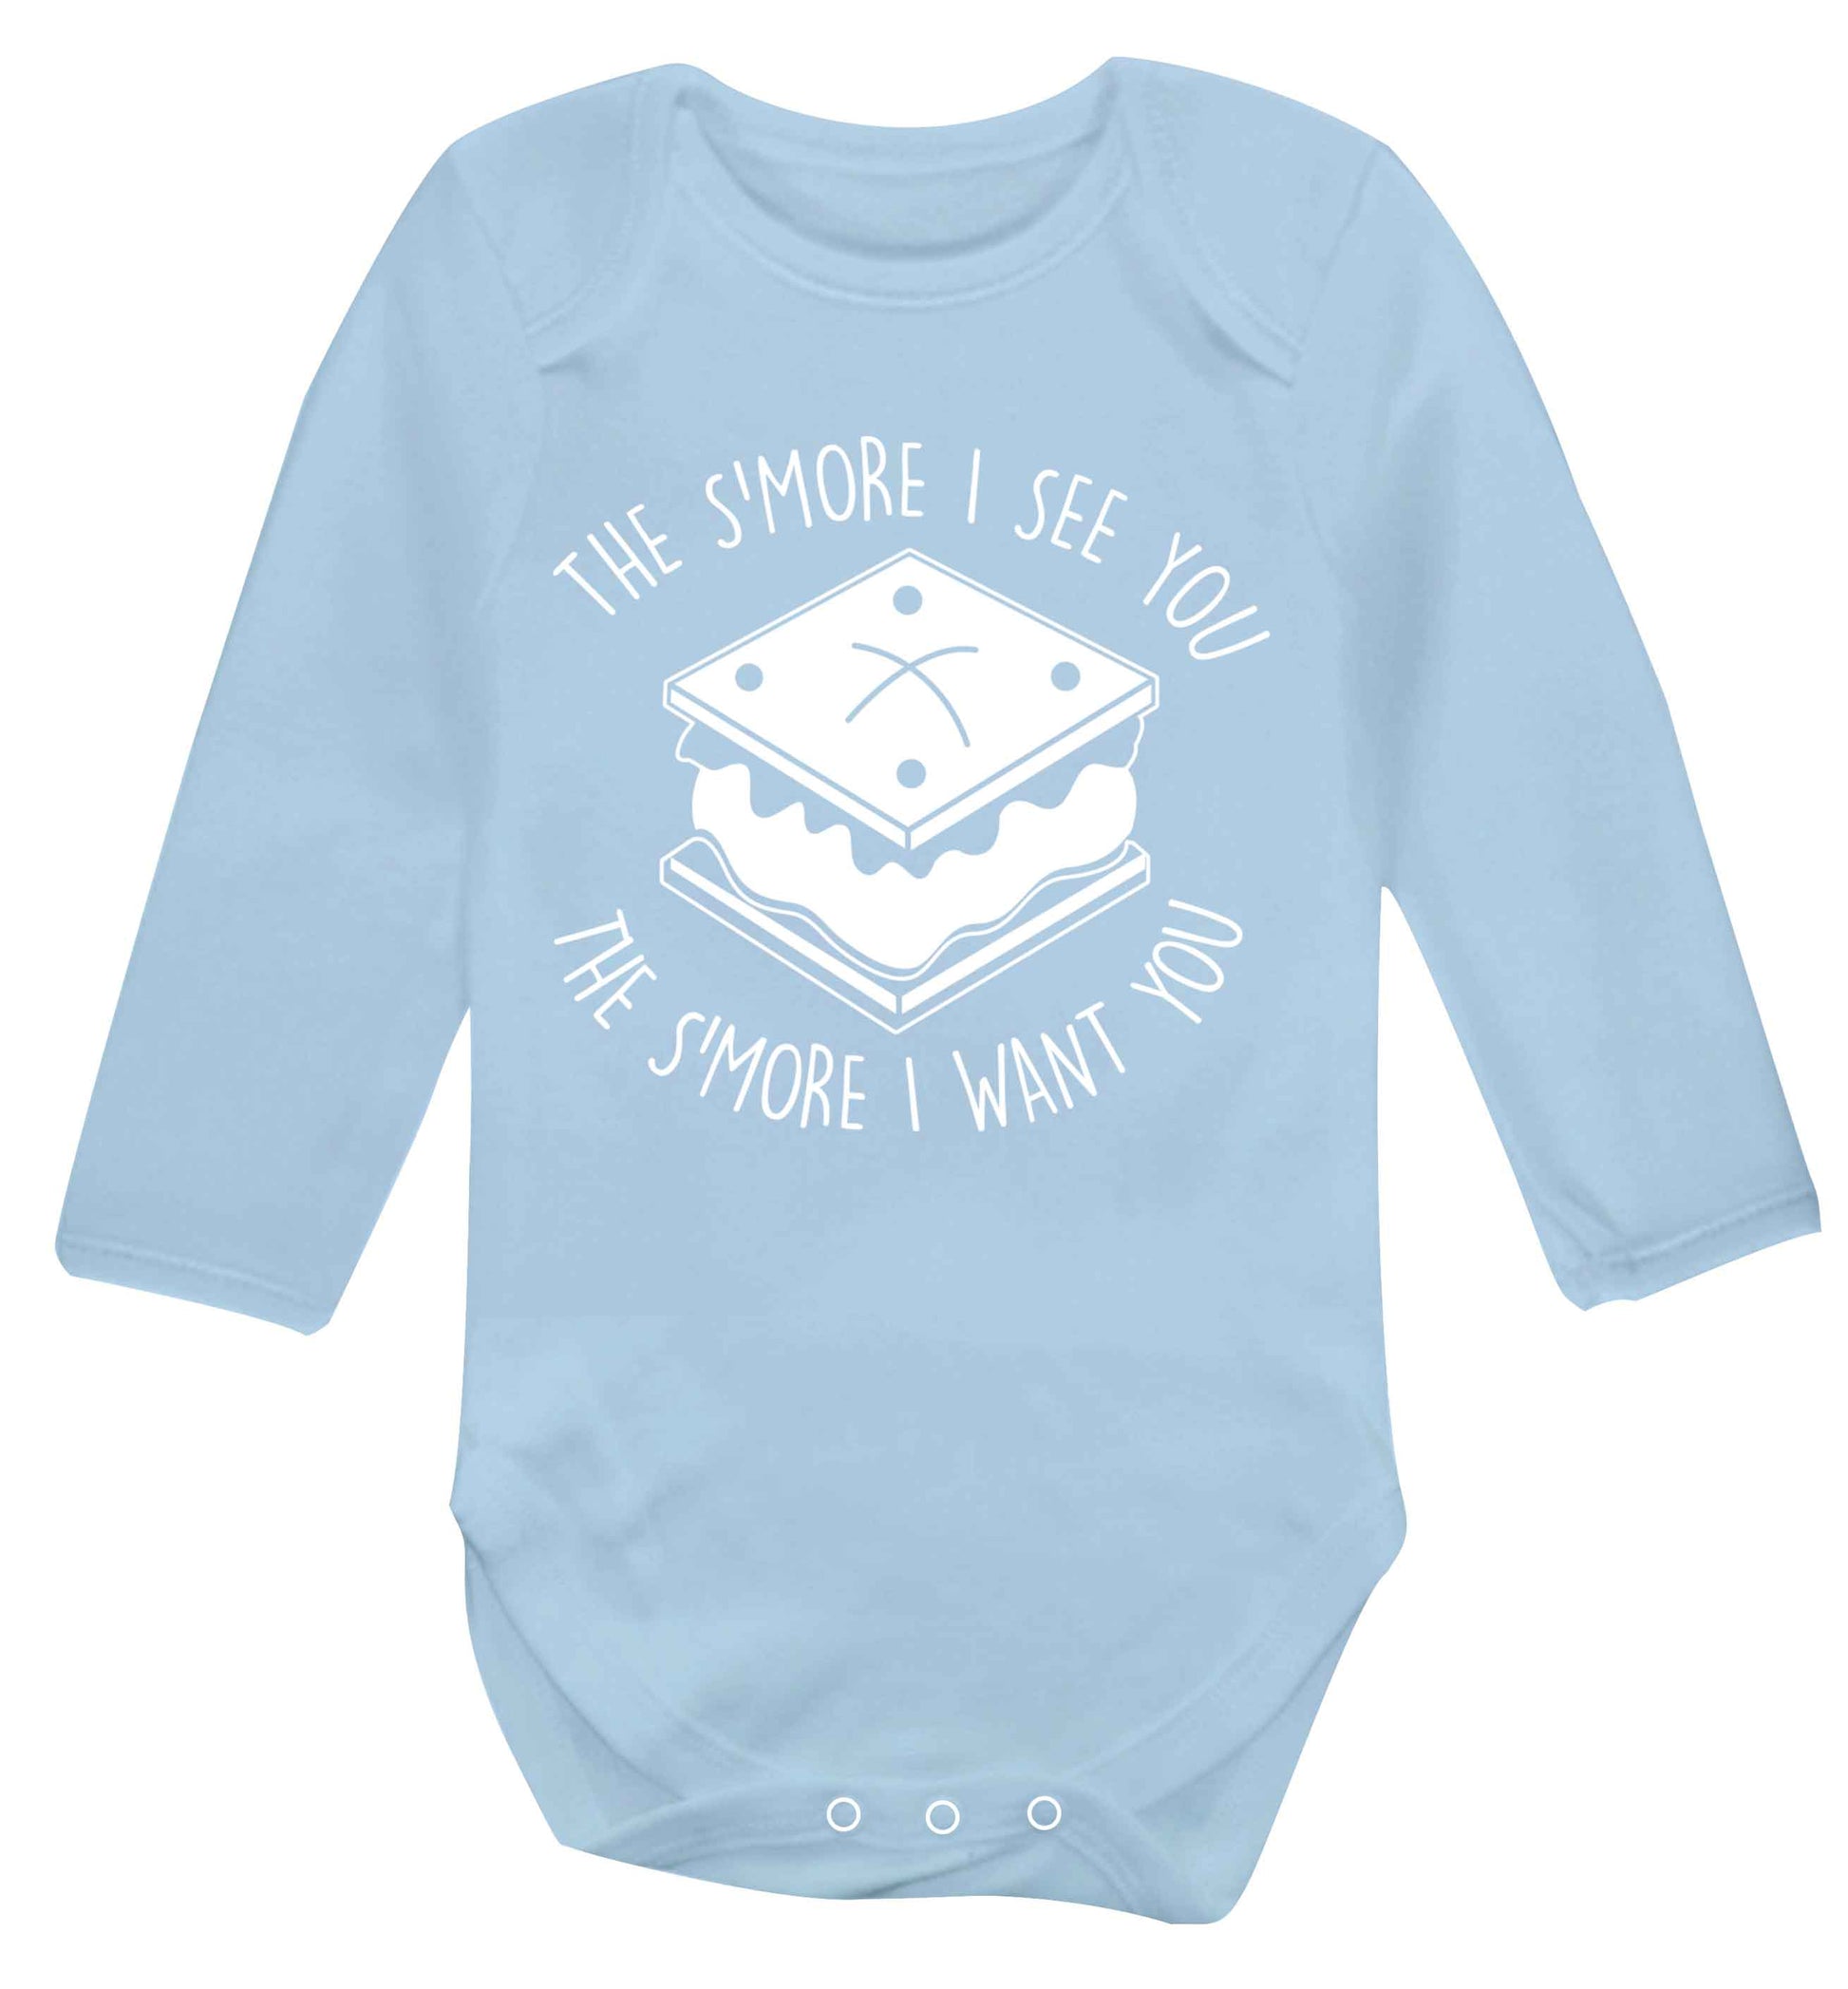 The s'more I see you the s'more I want you Baby Vest long sleeved pale blue 6-12 months